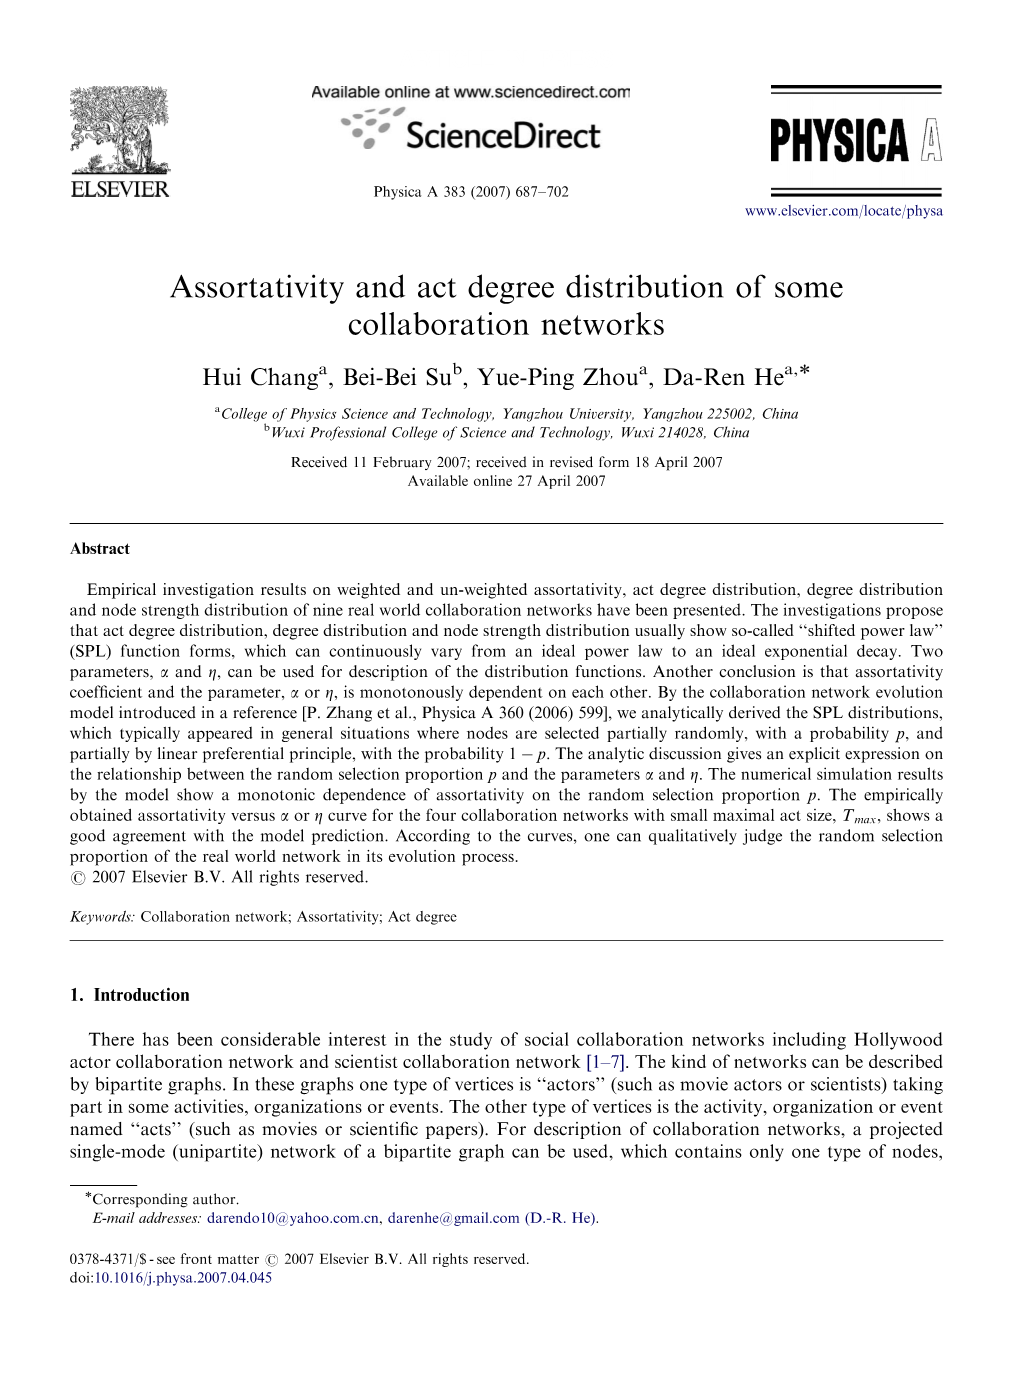 Assortativity and Act Degree Distribution of Some Collaboration Networks